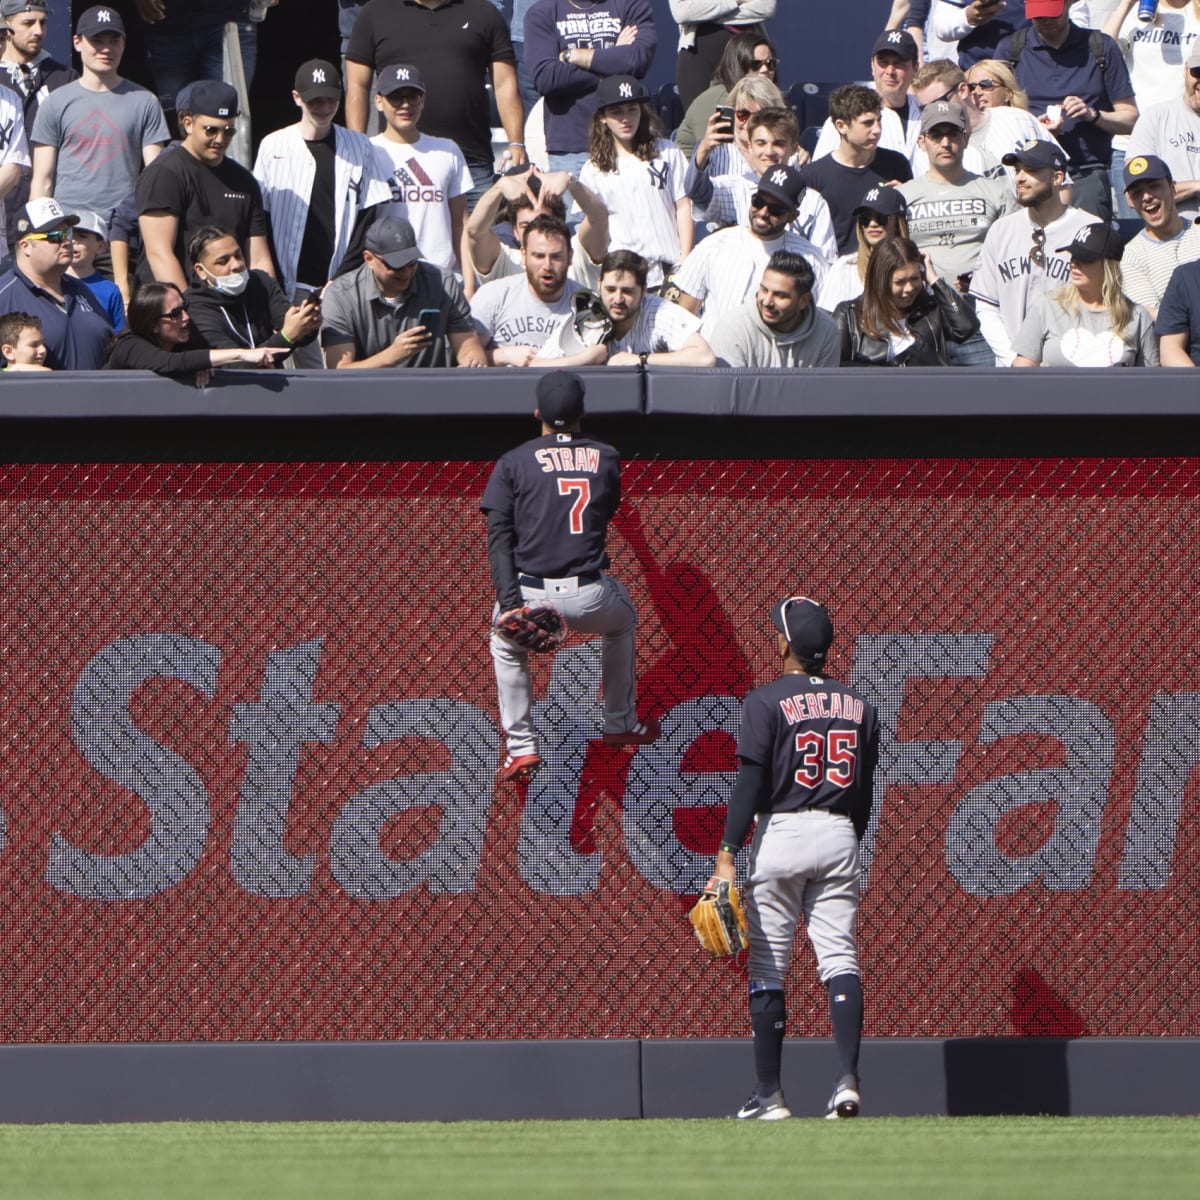 Yankees fans throw garbage at Guardians outfielders after win